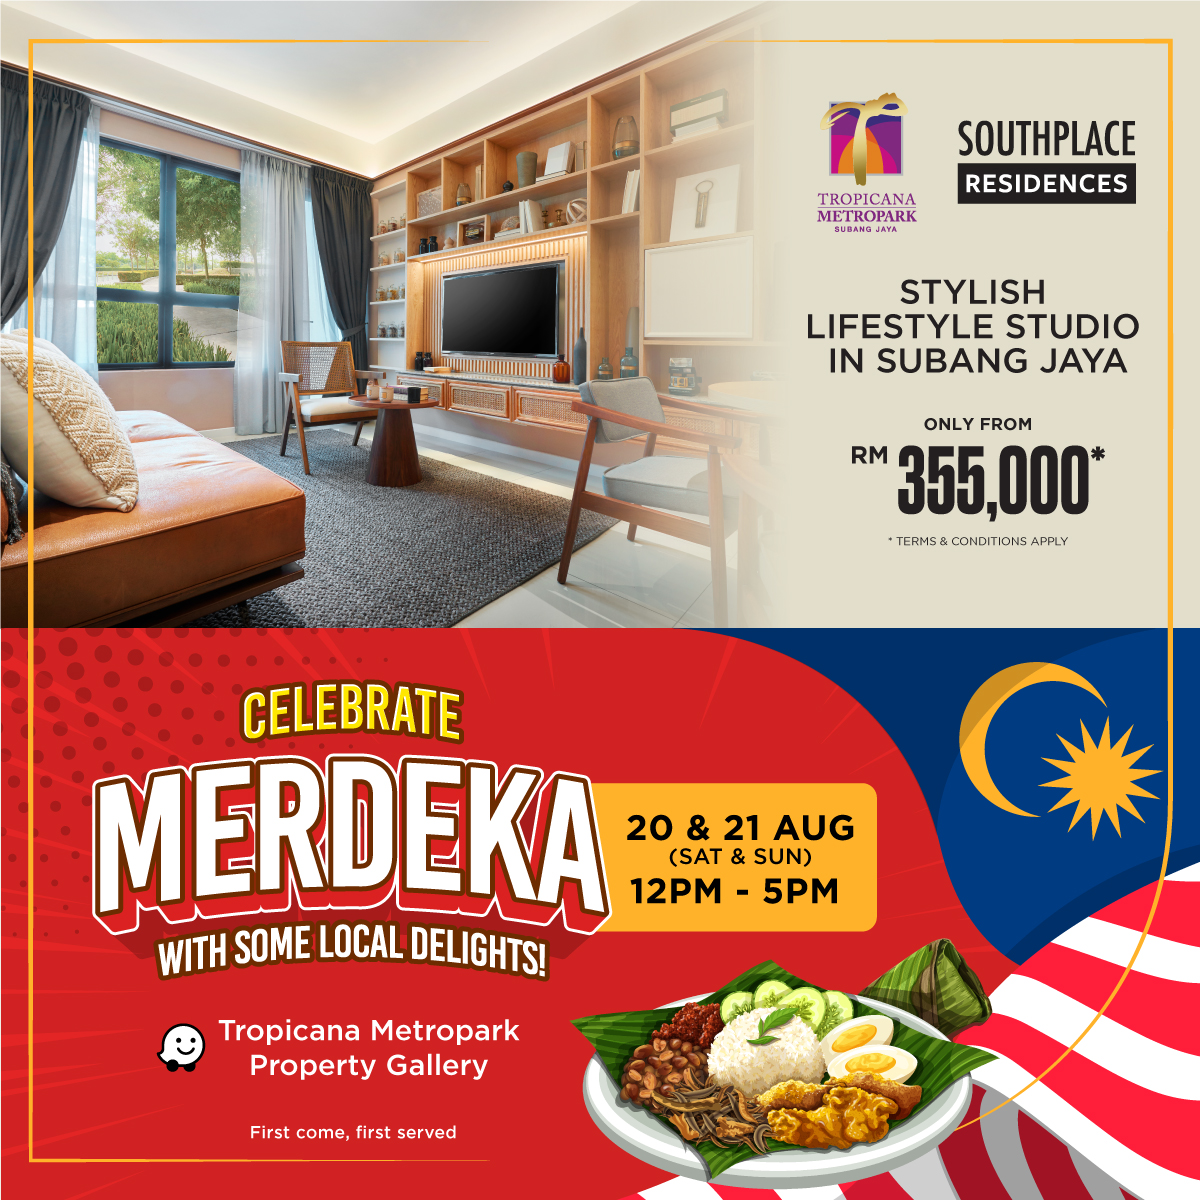 Celebrate MERDEKA with Some Local Delights!